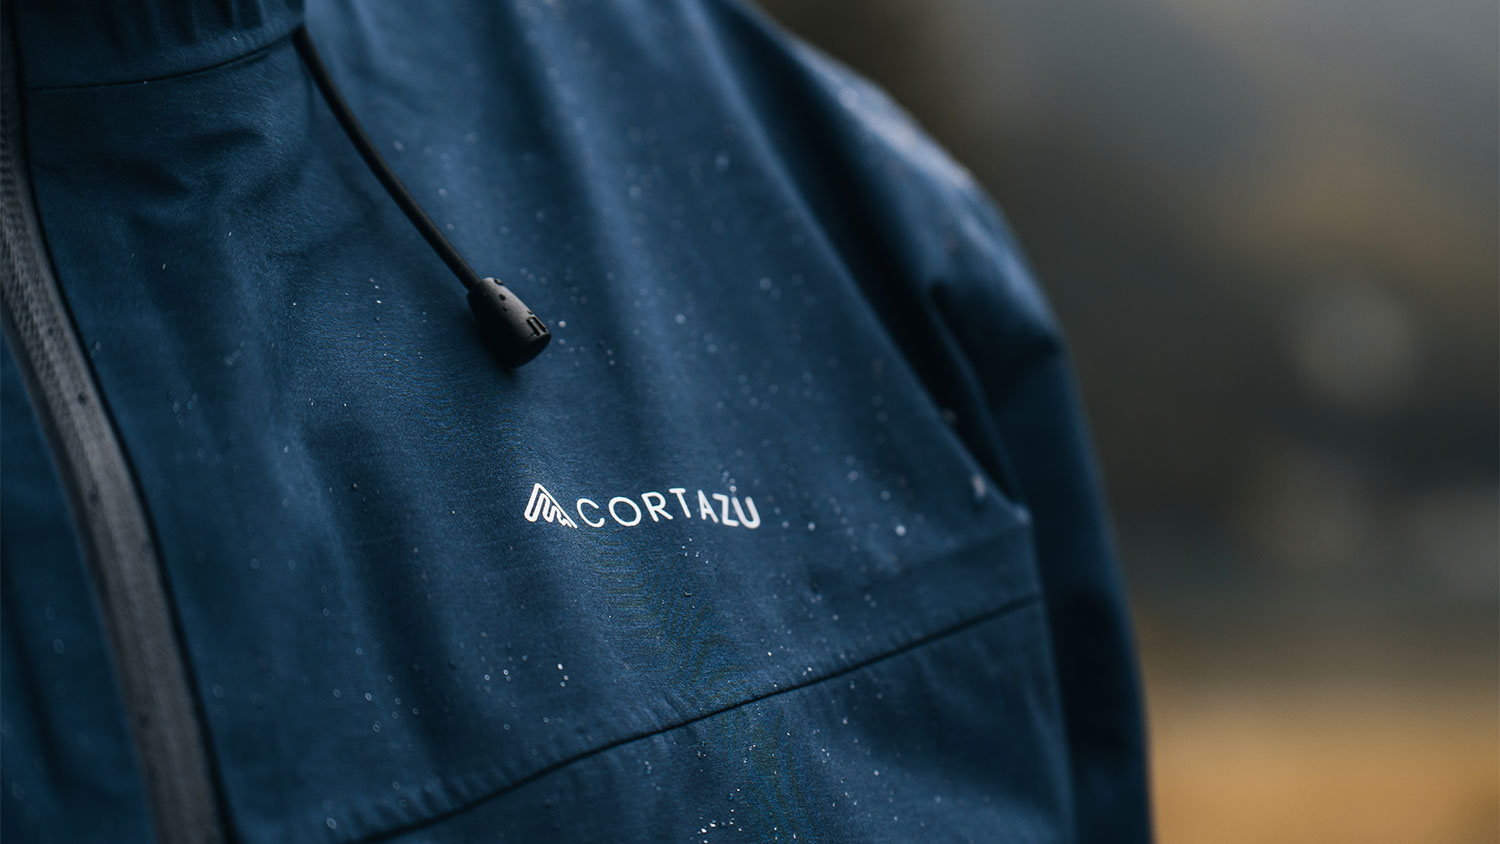 Are Cortazu's jackets really as waterproof as they claim?